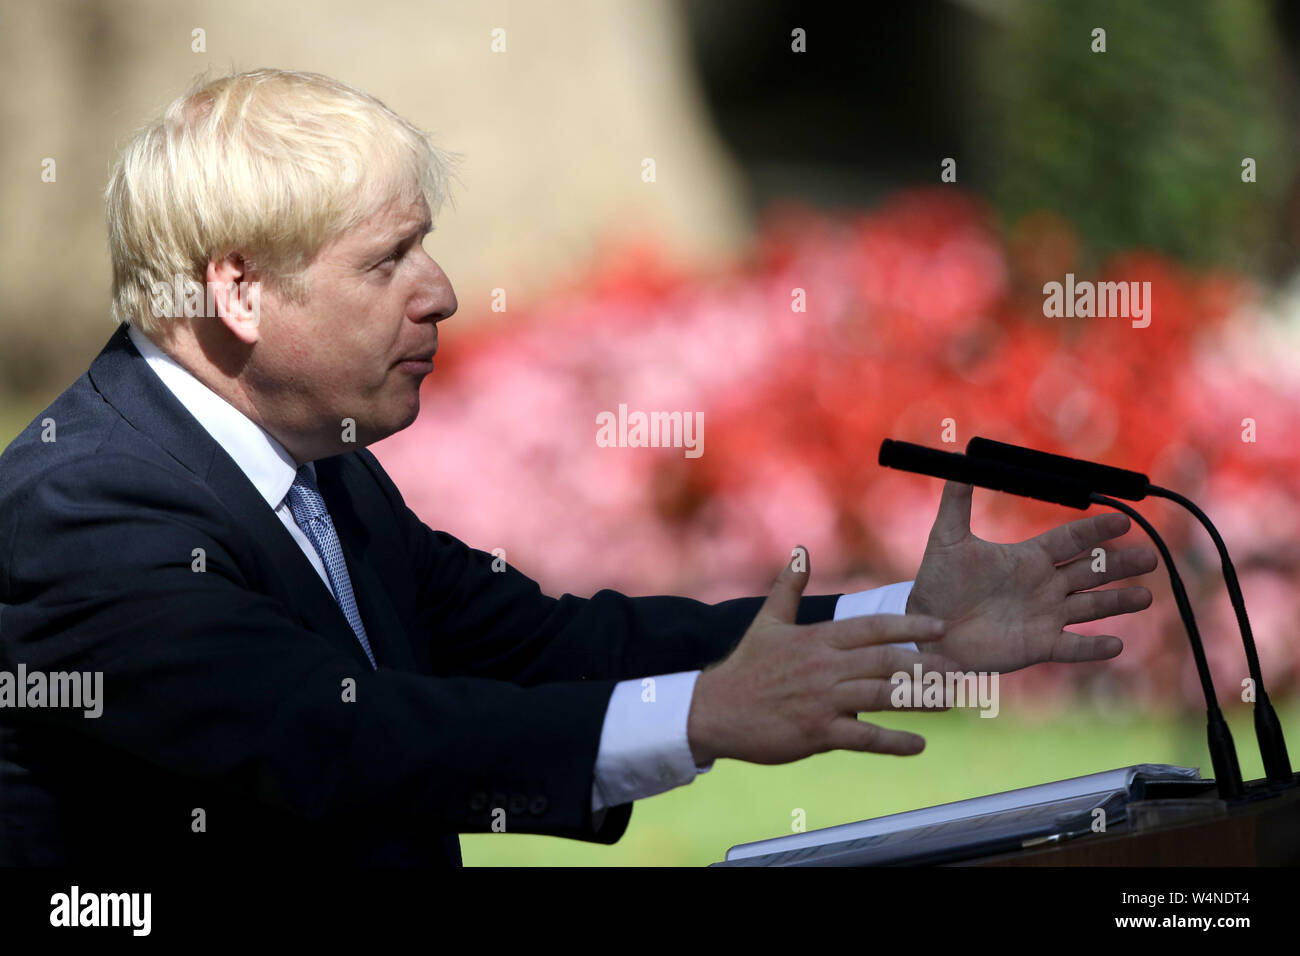 London, UK. 24th July 2019. The new British Prime Minister Boris Johnson, delivers a speech in Downing Street after going to Queen Elizabeth II, who asked him to form a new government after Theresa May stepped down as Prime Minister. Johnson is pictured as he takes over as the new Prime Minister at Number 10 Downing Street, London, on July 24, 2019 Credit: Paul Marriott/Alamy Live News Stock Photo